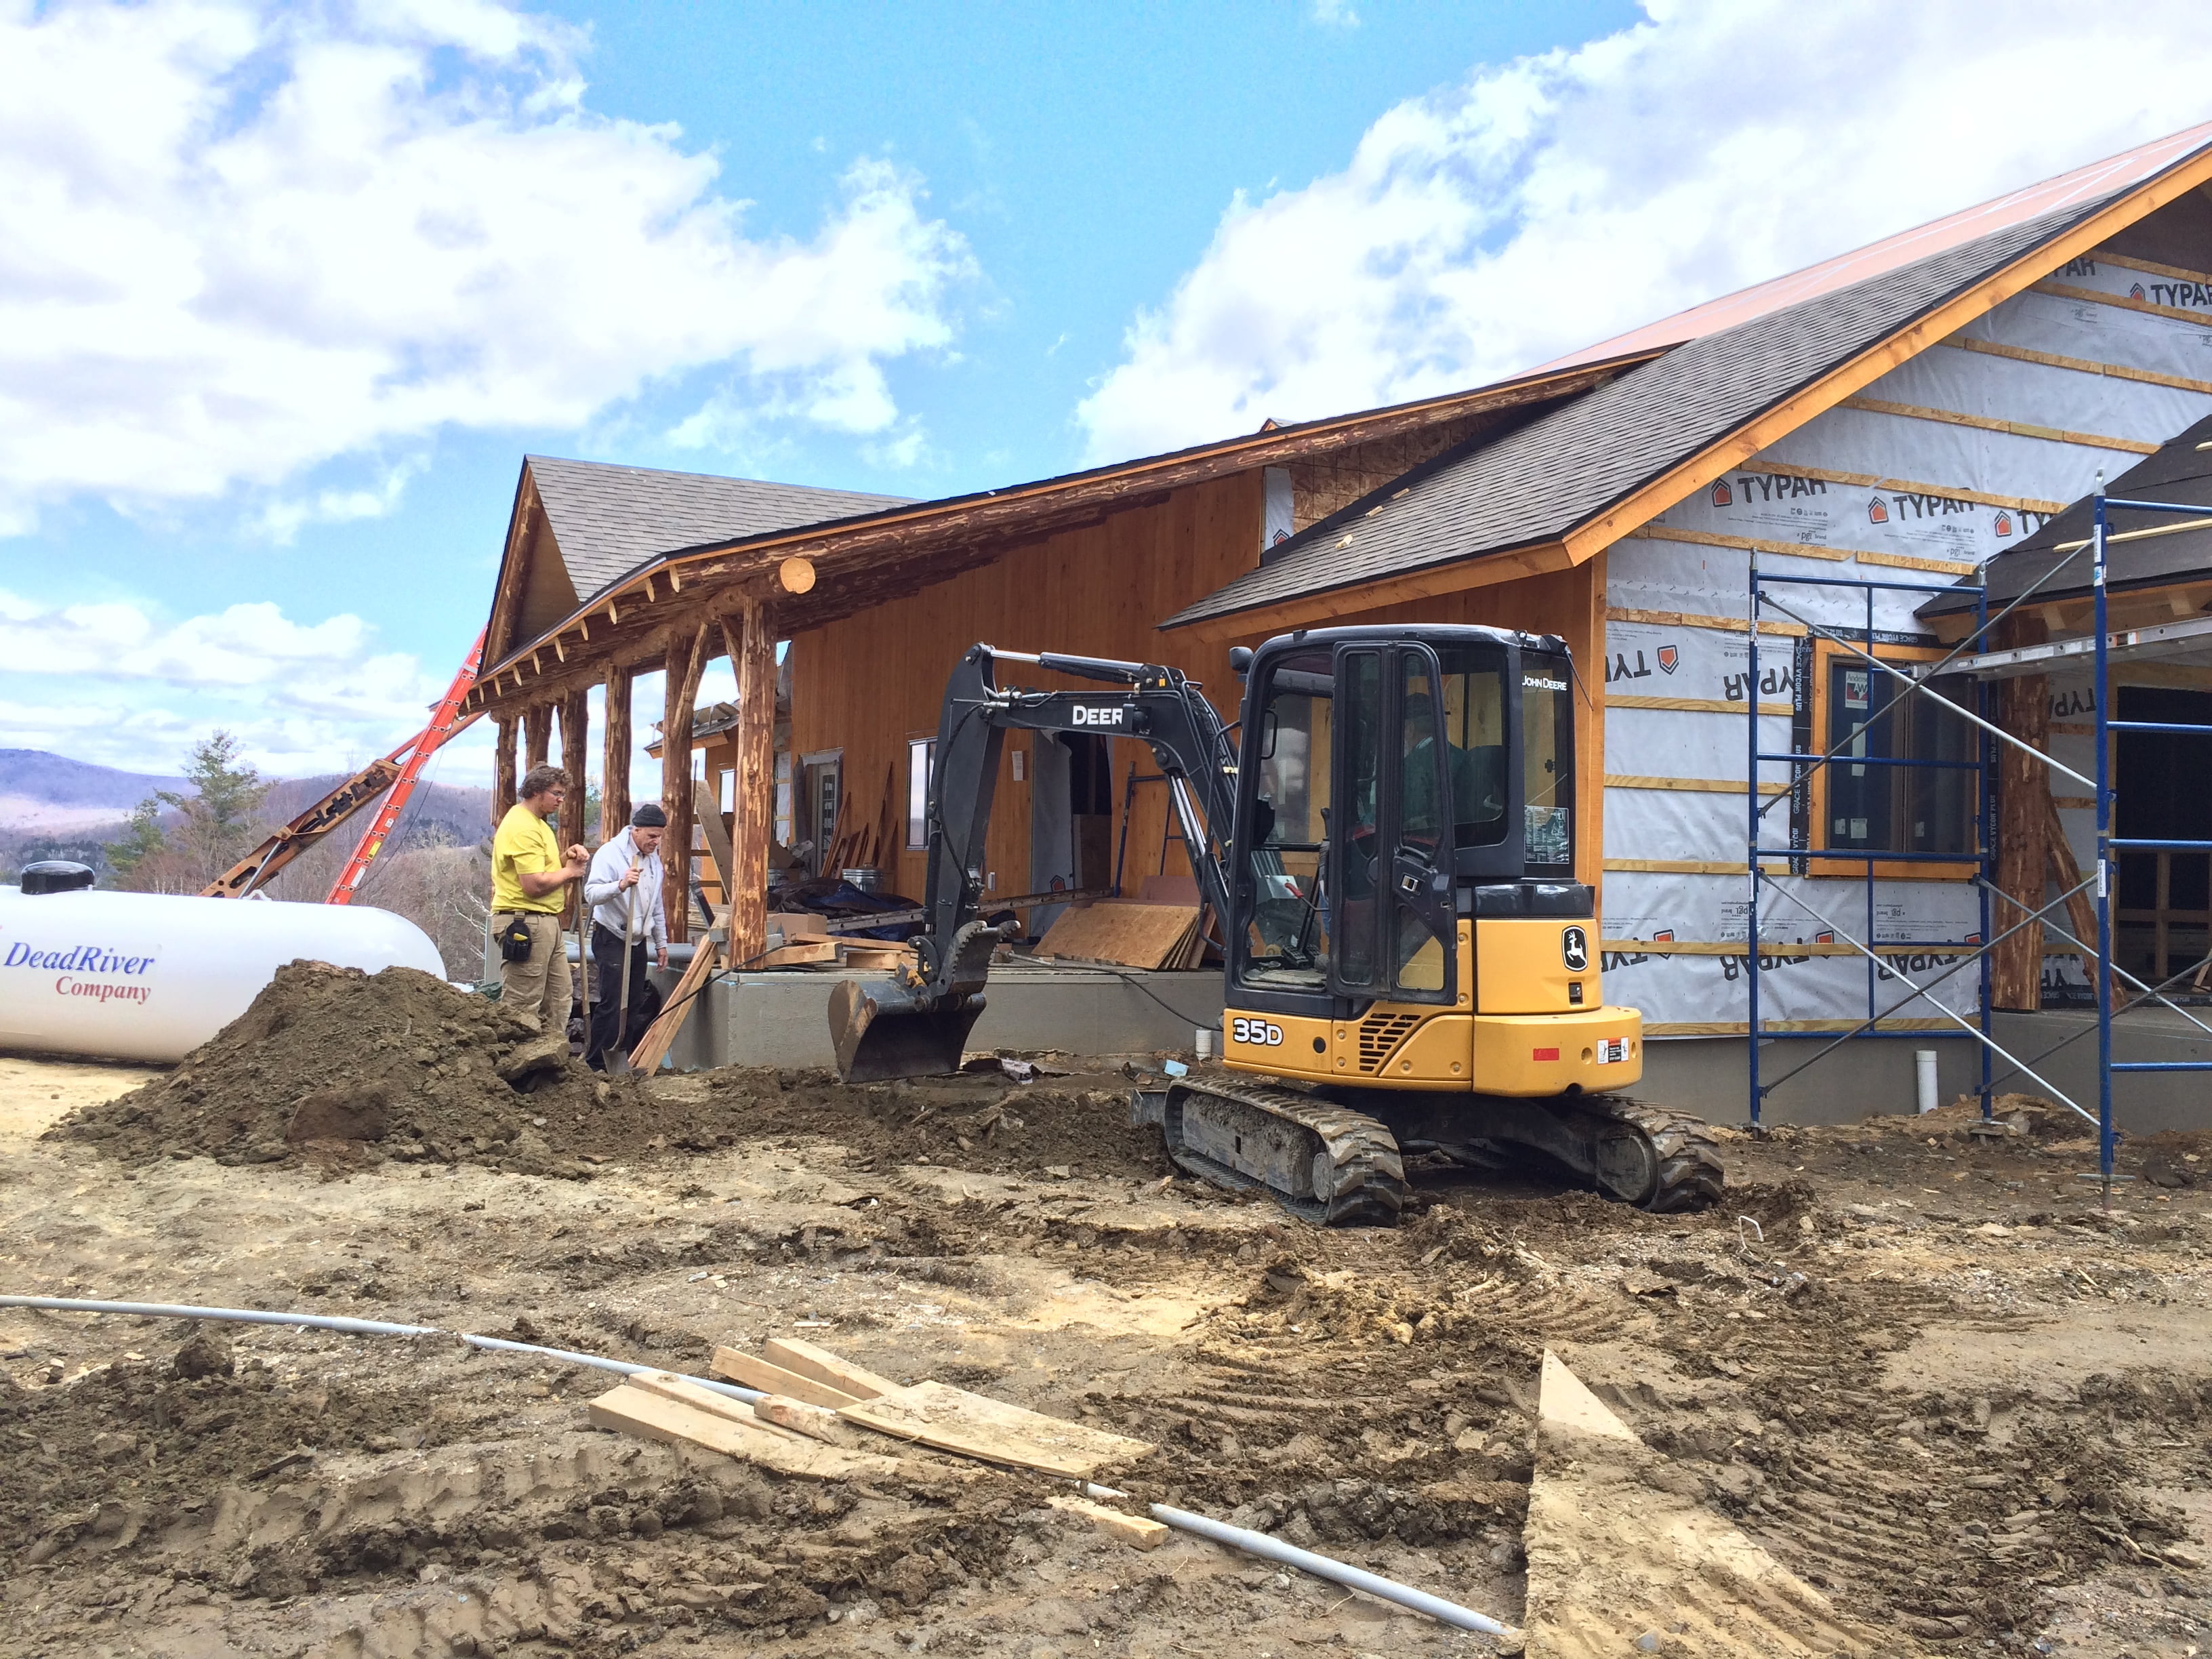 Construction Update – week of May 3: